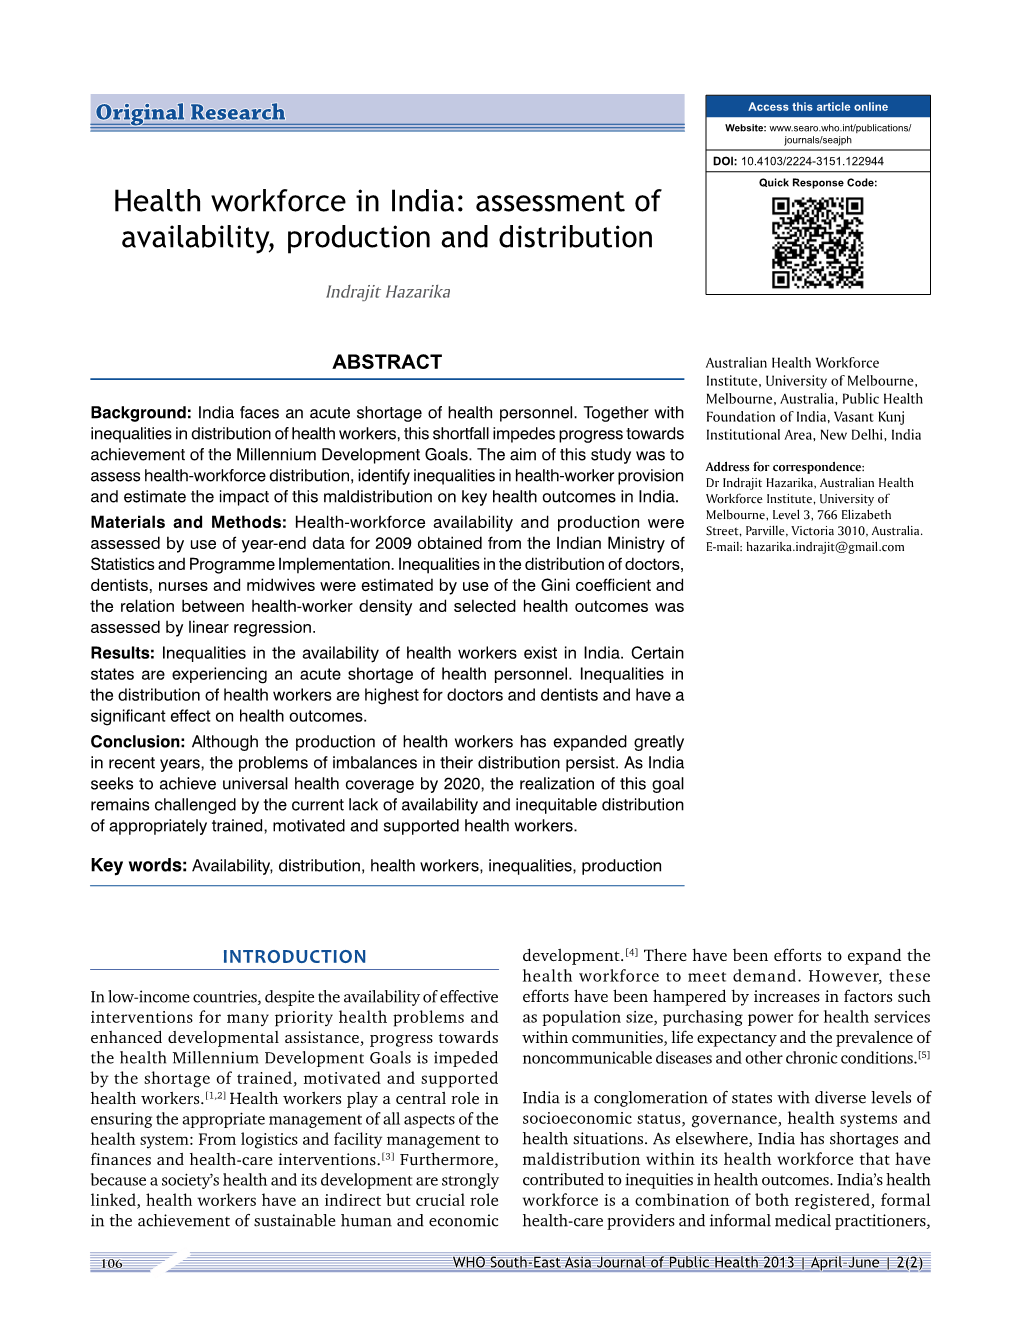 Health Workforce in India: Assessment of Availability, Production and Distribution